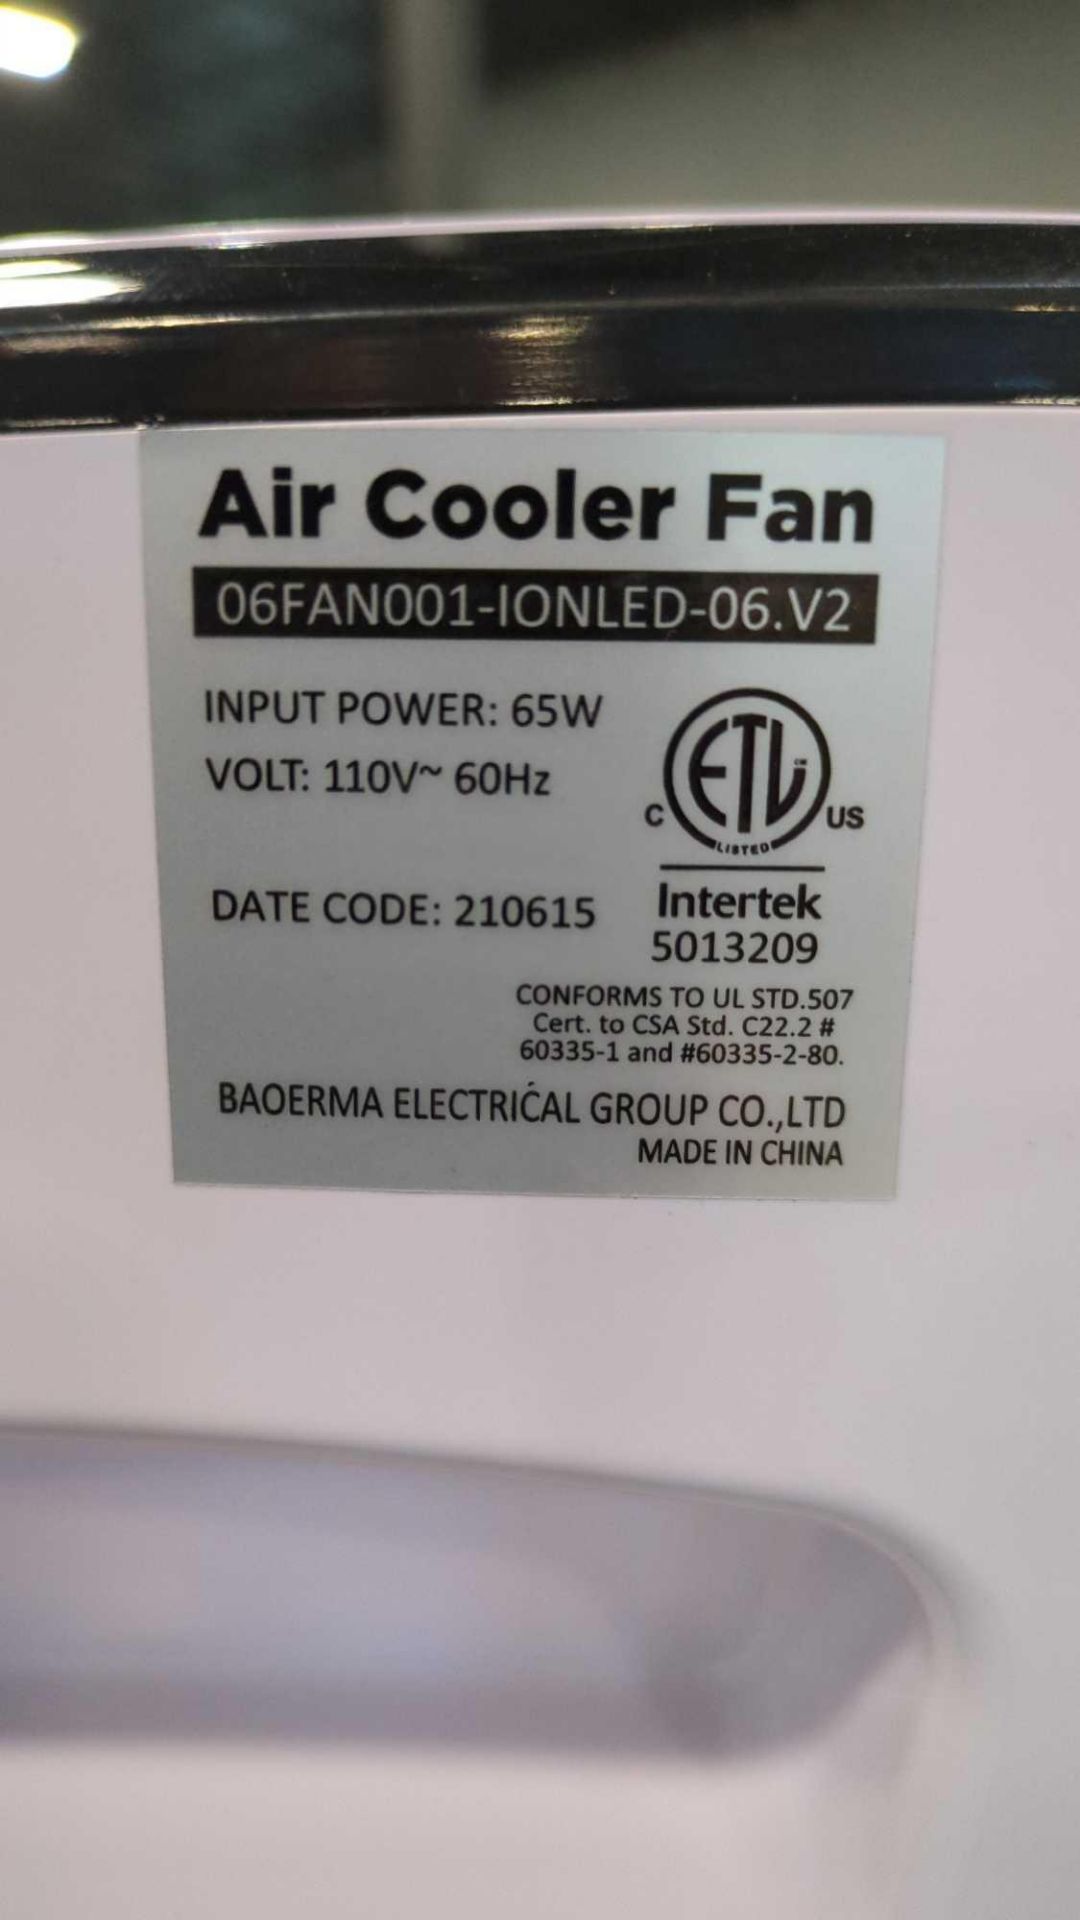 BestCool Air Cooler Fans - Image 8 of 8